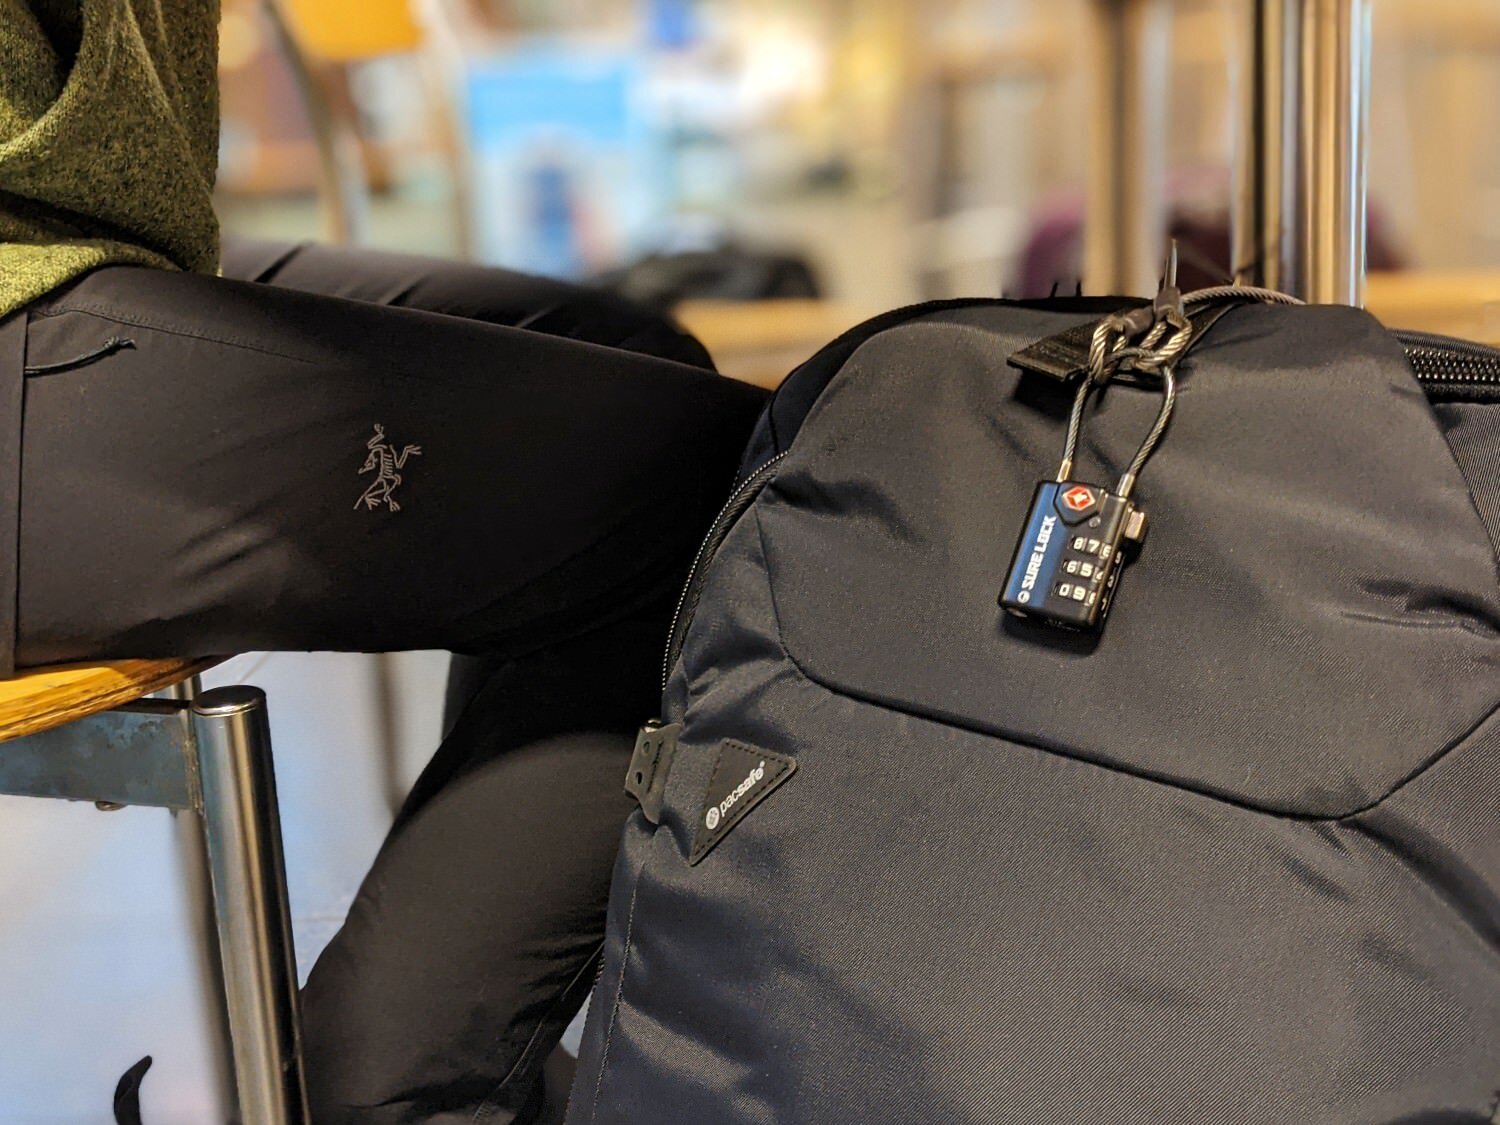 You can use small luggage locks to lock the zippers on your duffel bag